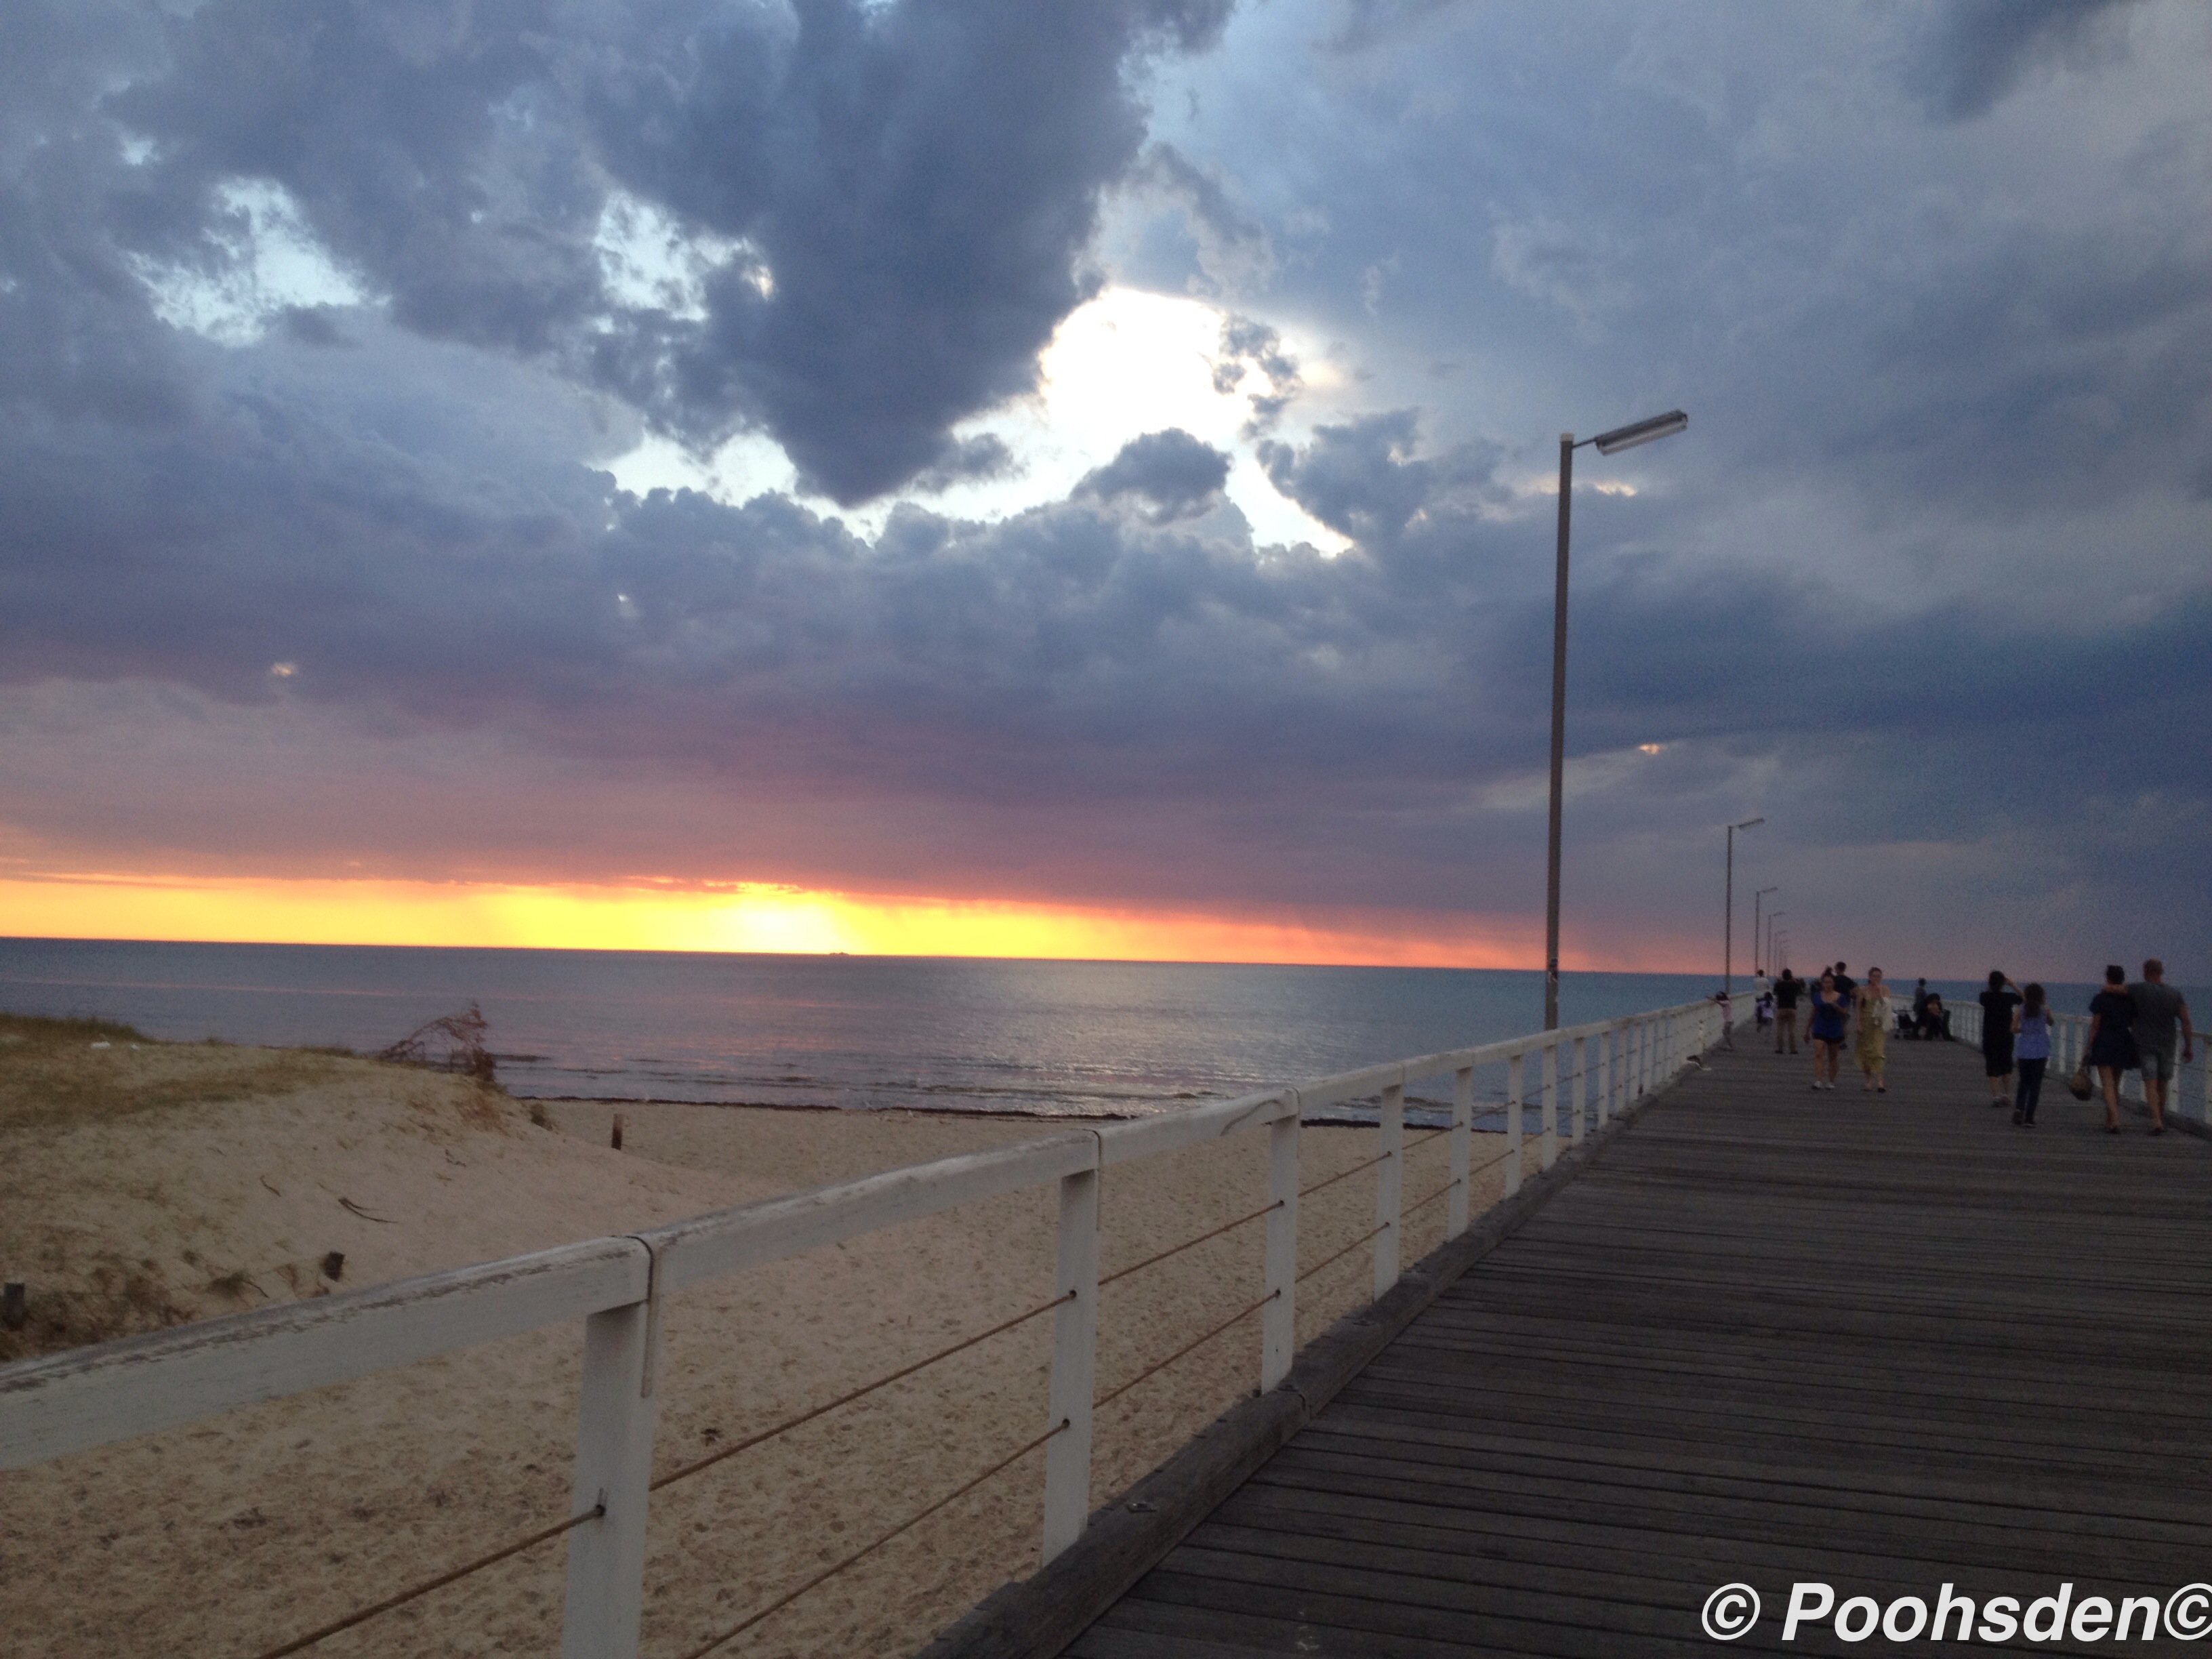 Catching the sunset at Semaphore - What a sight